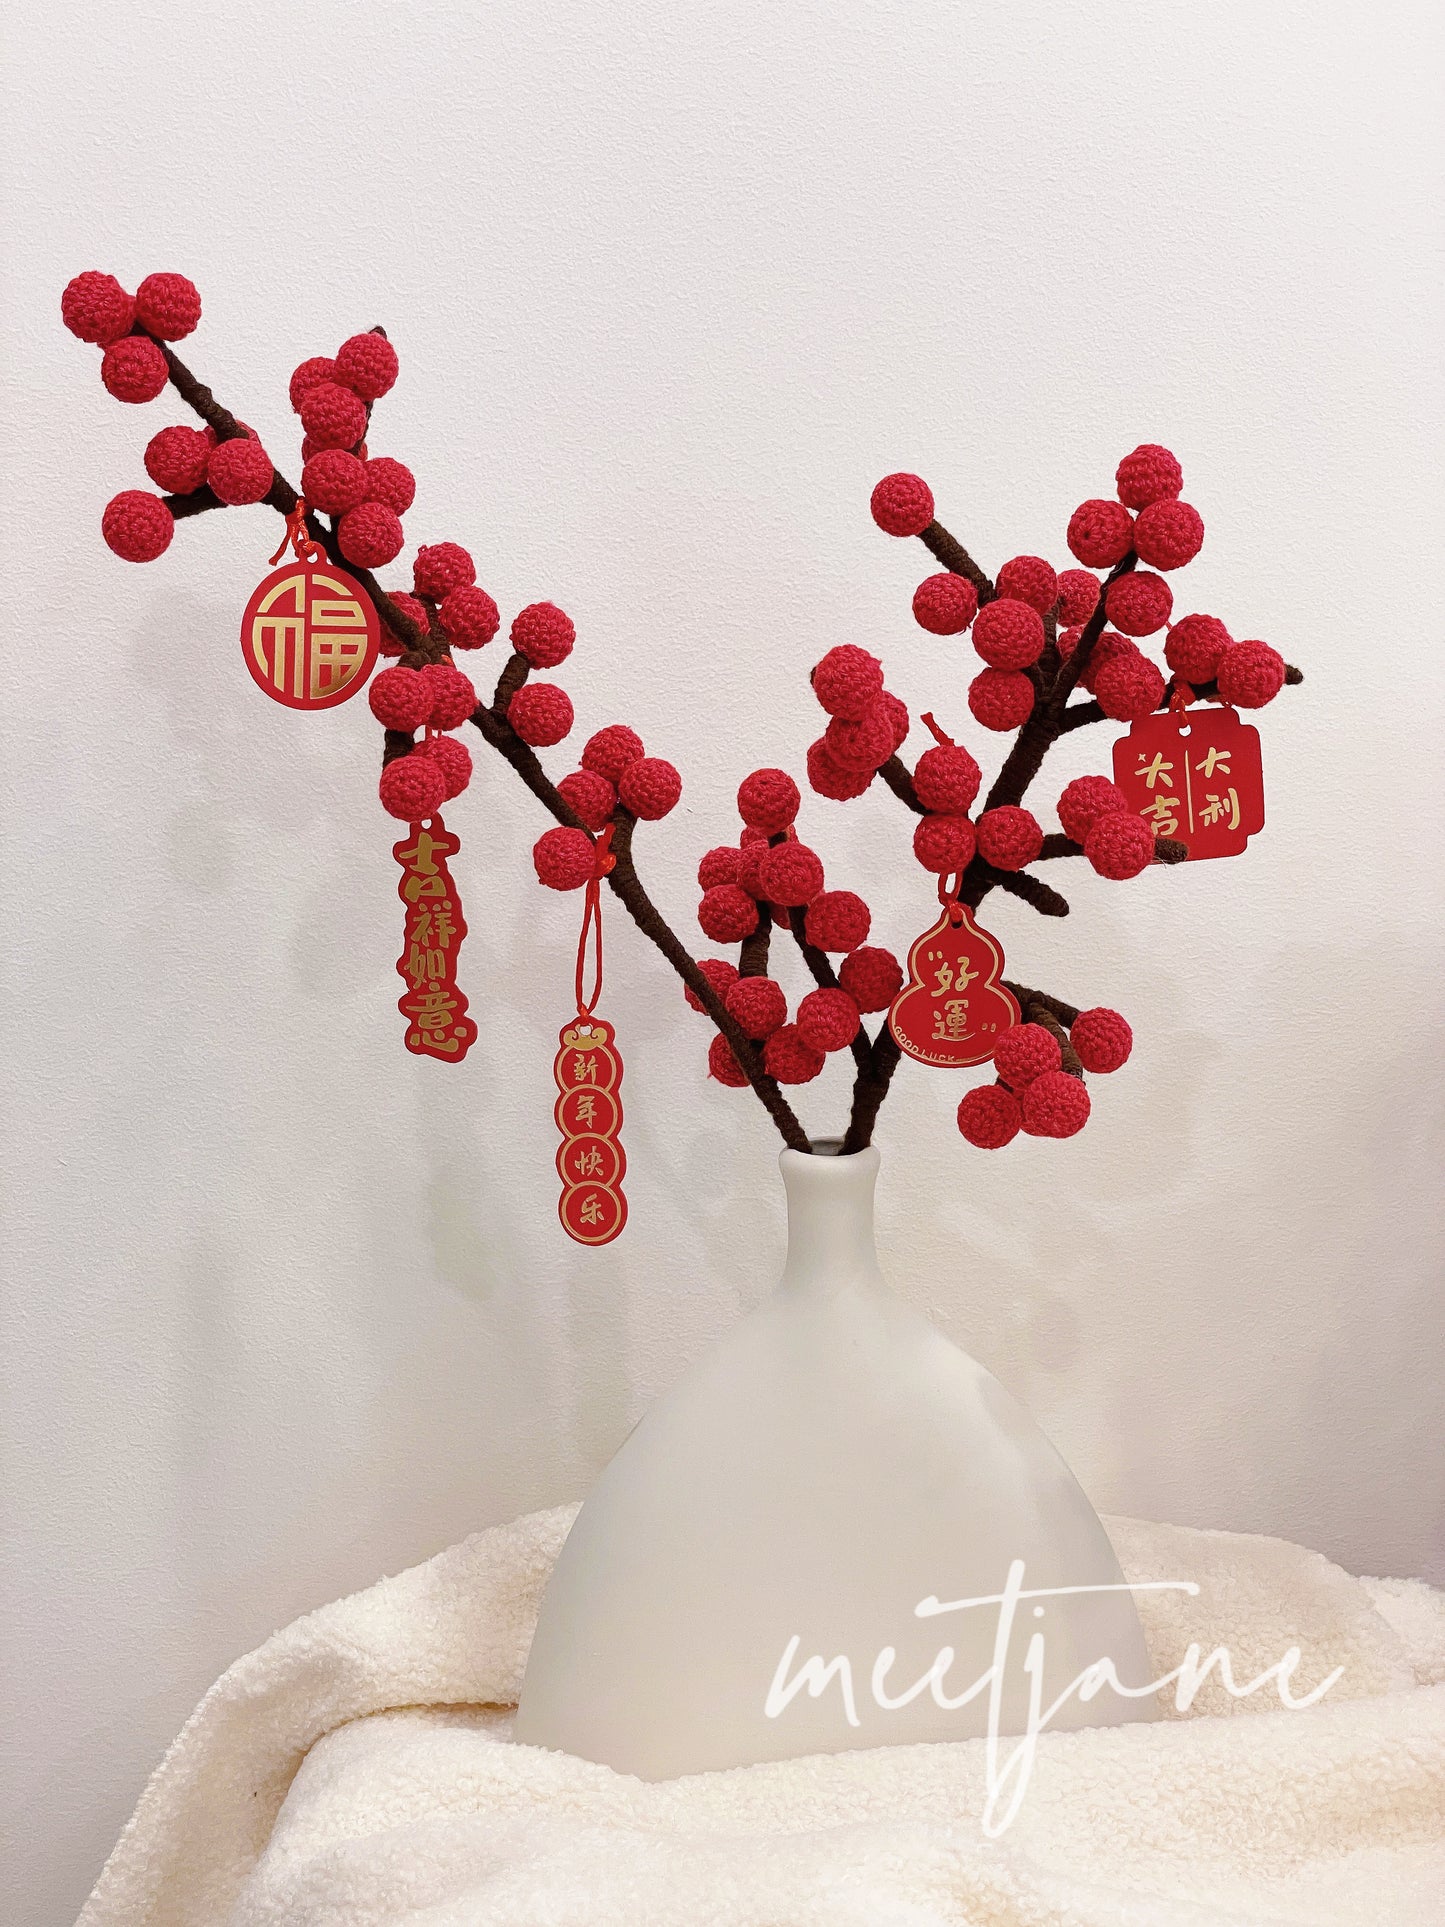 Meetjane bouquet| Melbourne handmade |Holly berries (Chinese New Year Special Edition)